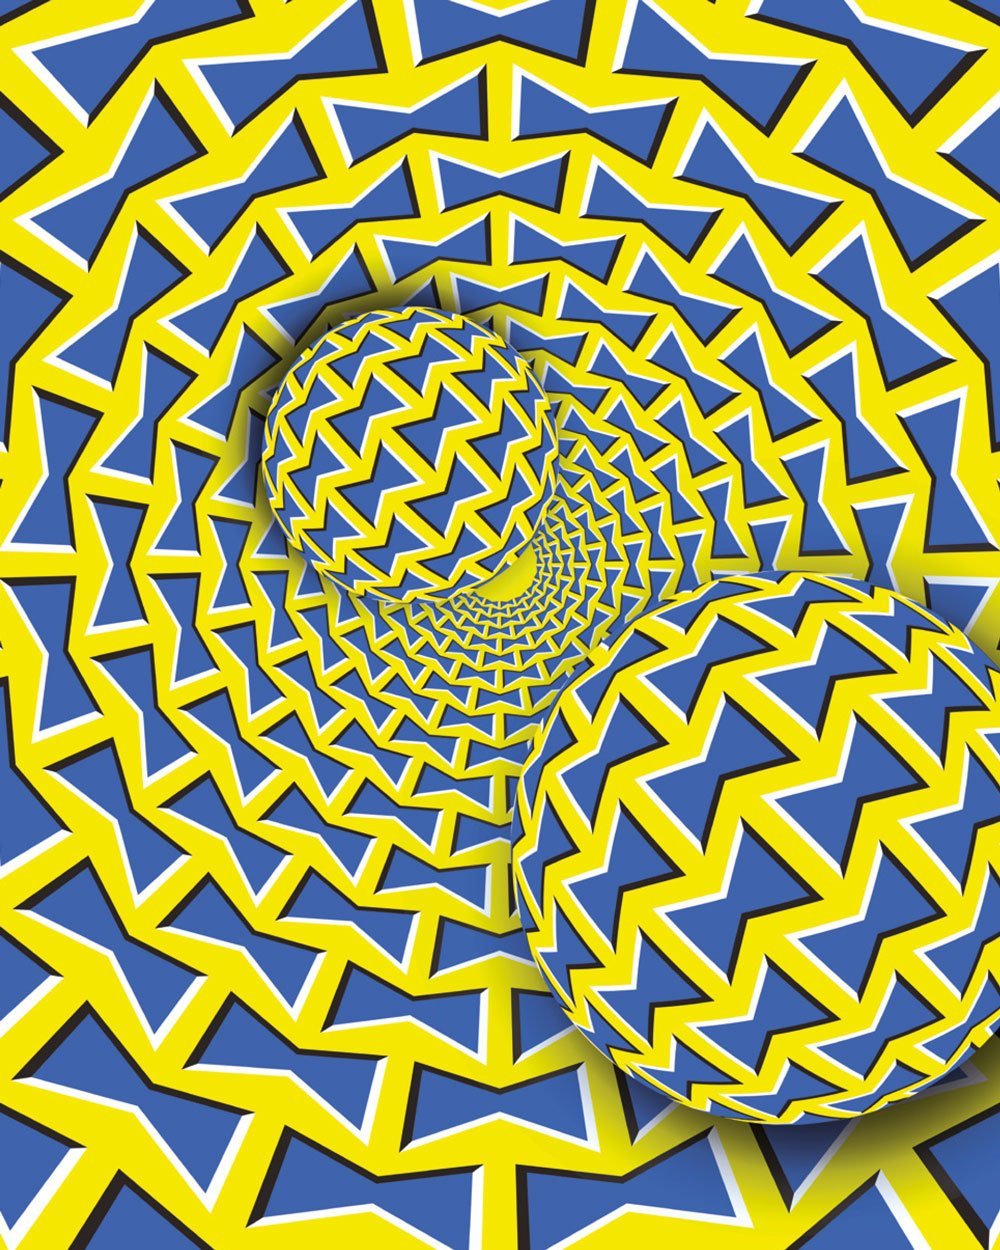 The Art of Optical Illusion - Art of Play